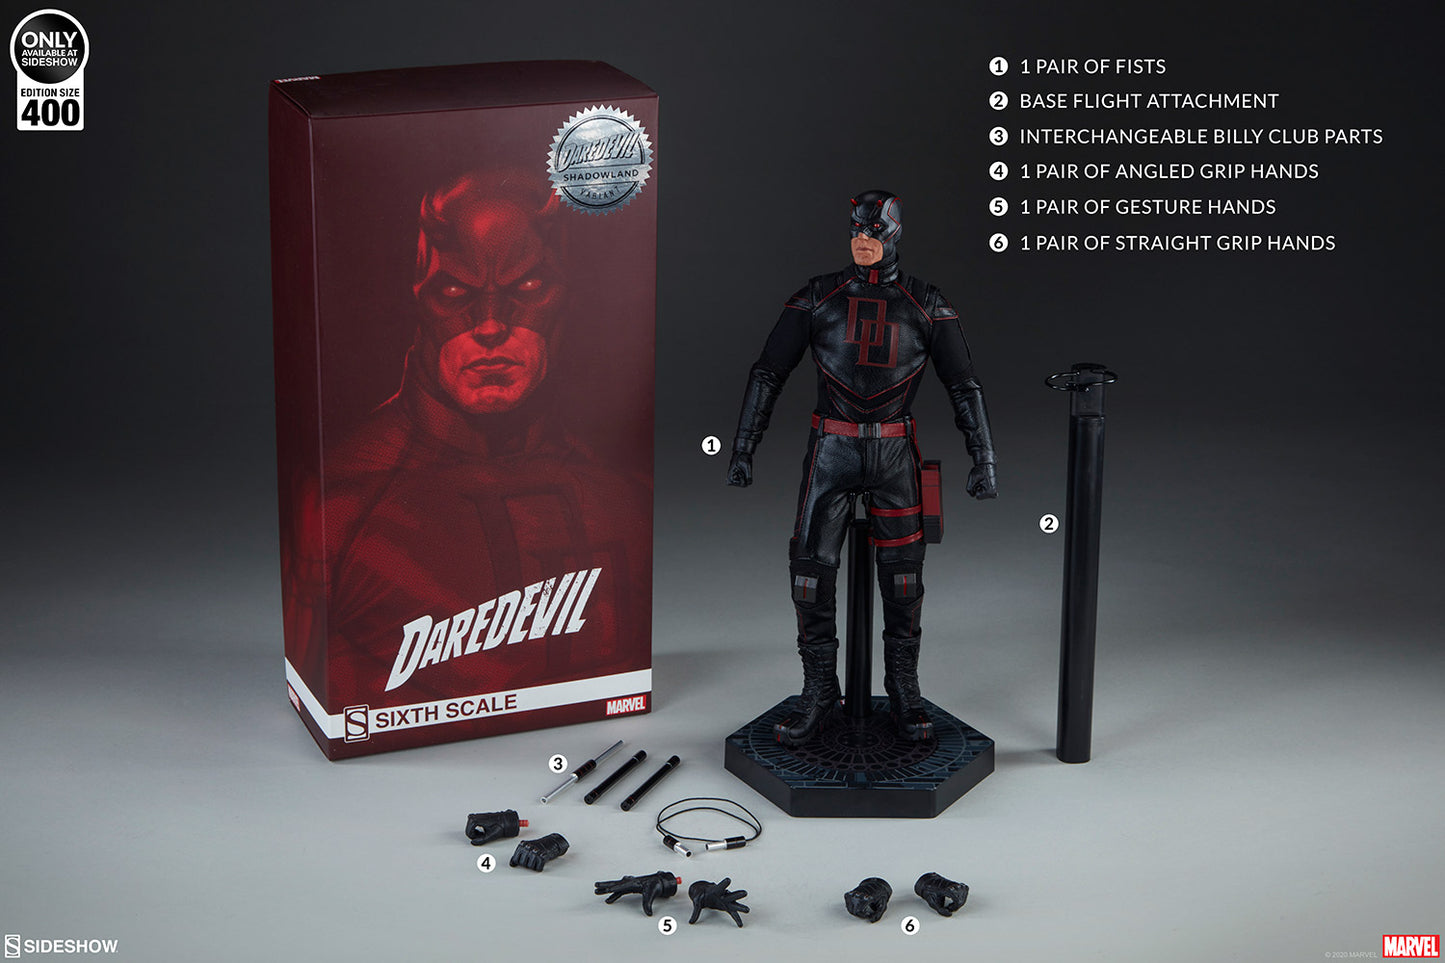 Daredevil: Shadowland Sixth Scale Figure with accessories and packaging